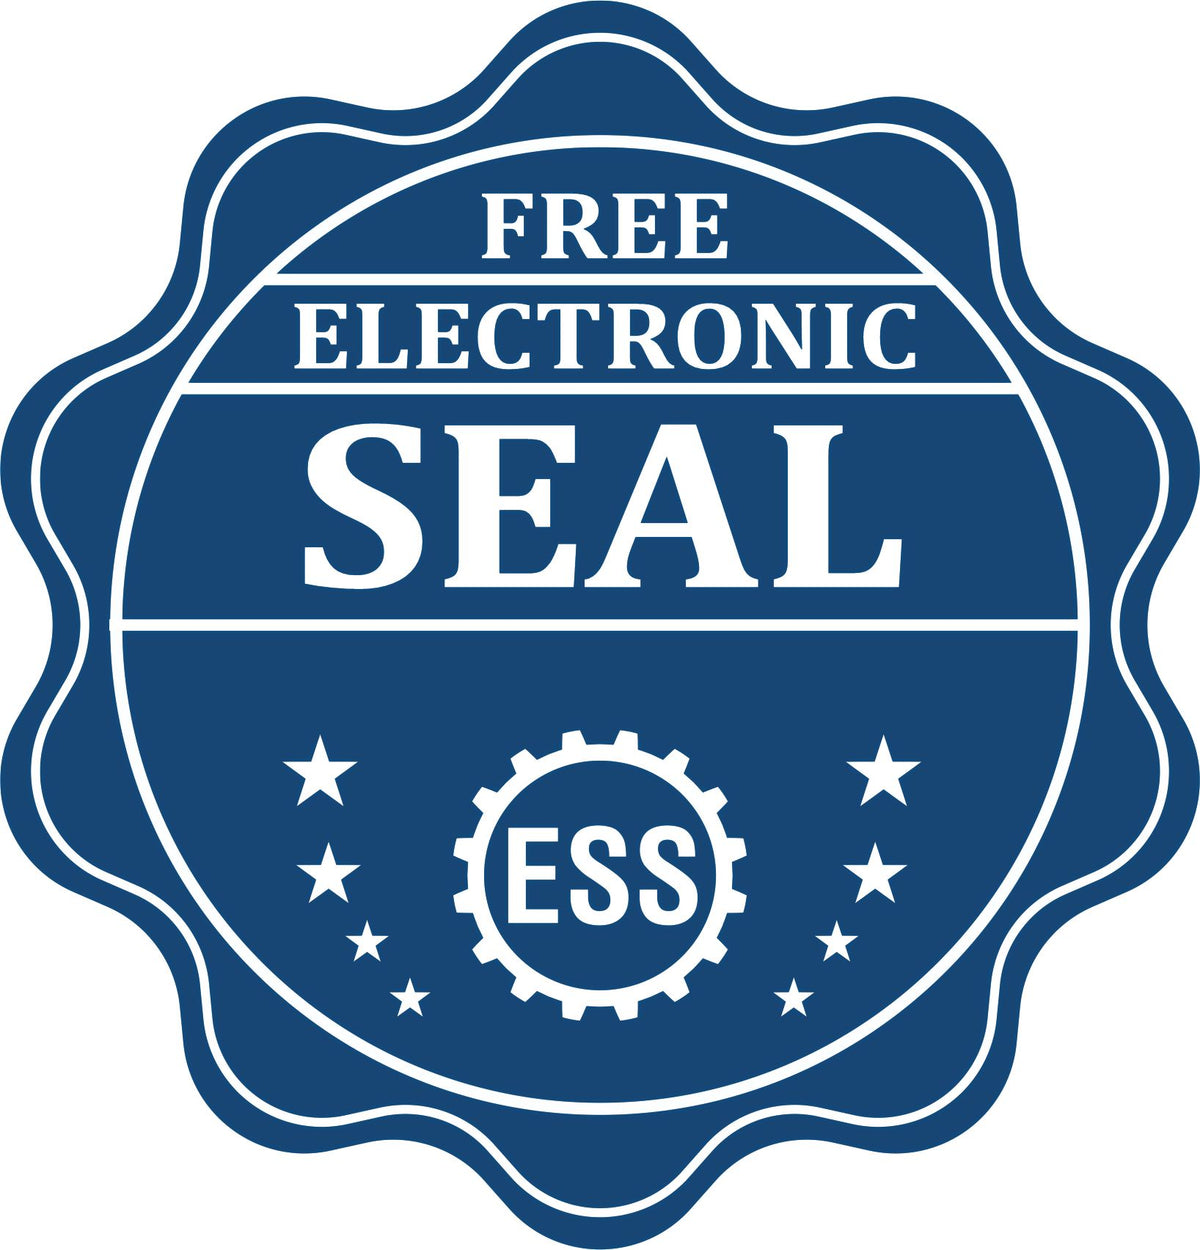 A badge showing a free electronic seal for the Heavy Duty Cast Iron Virginia Engineer Seal Embosser with stars and the ESS gear on the emblem.